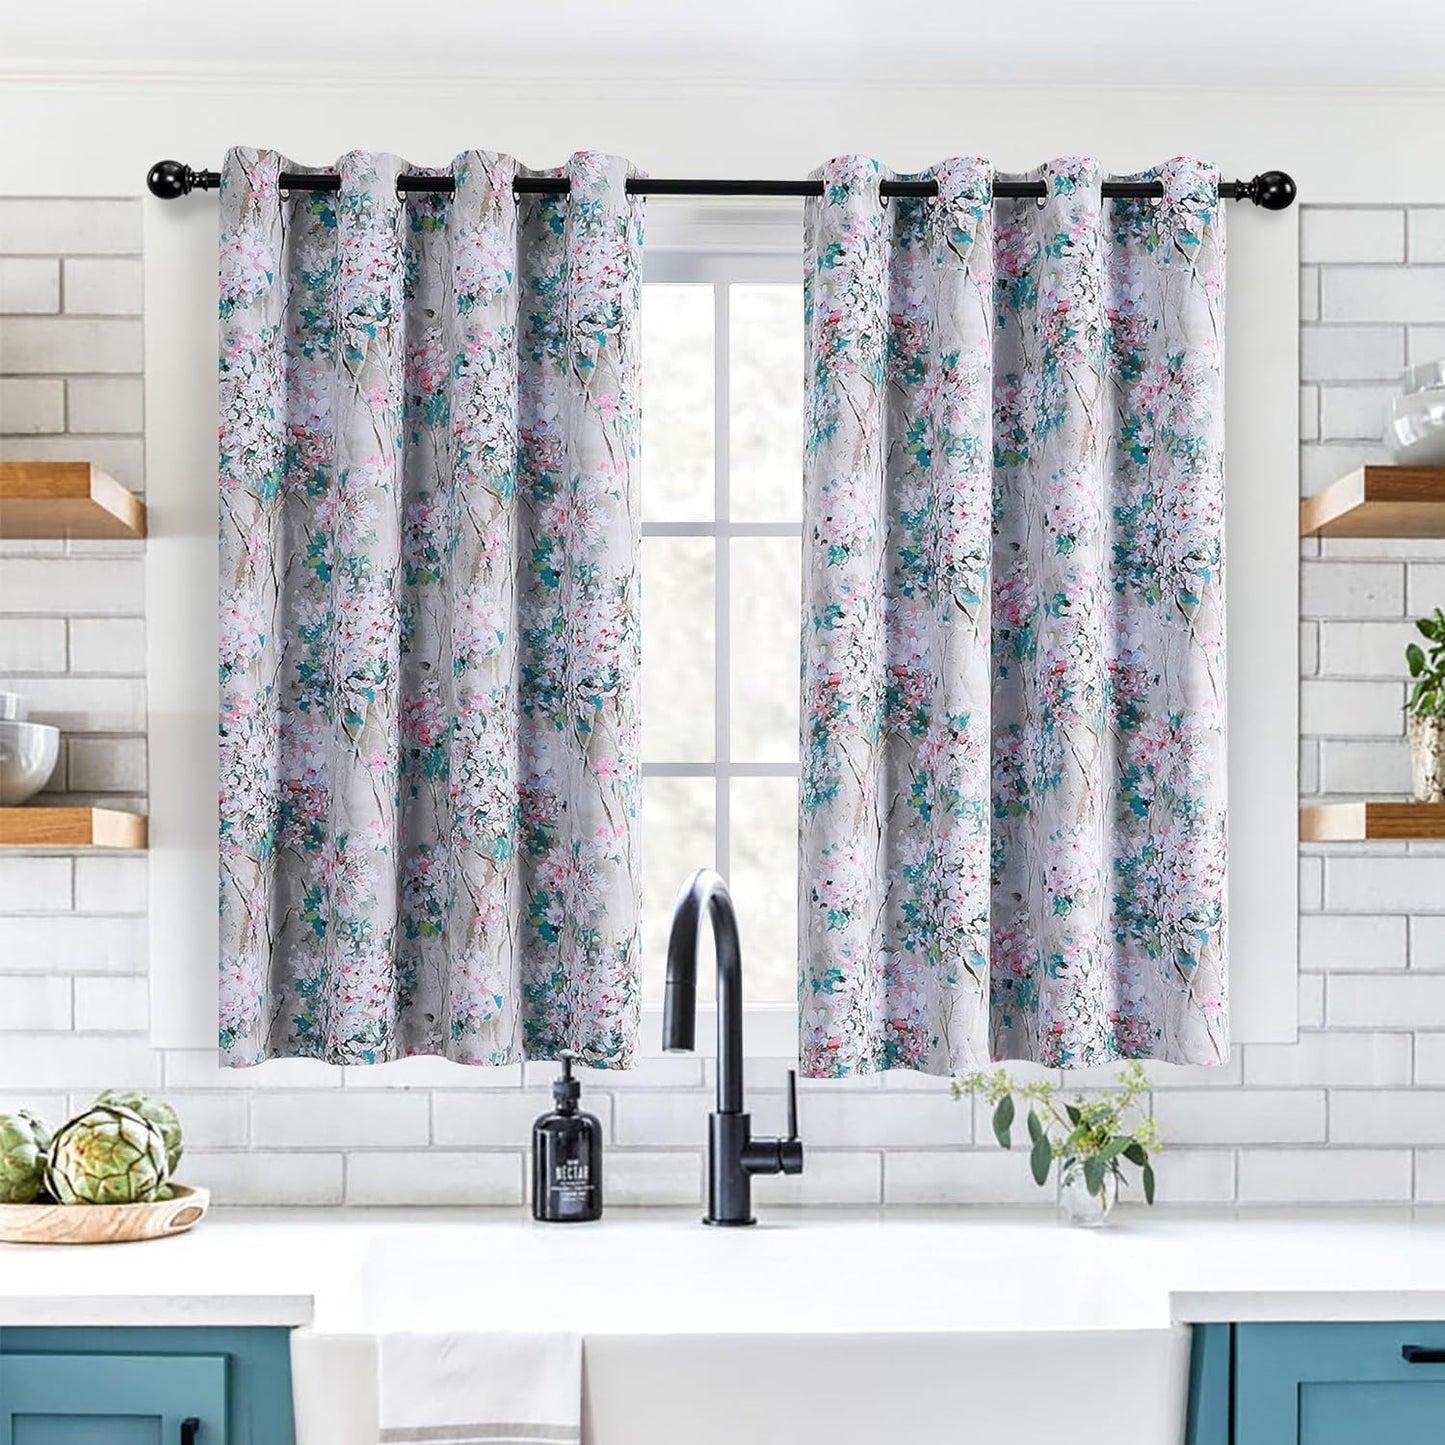 MYSKY HOME Floral Blackout Curtains 84 Inches Long 2 Panels Pink and Blue Floral Thermal Insulated Ink Vintage Flower Printed Window Grommet for Bedroom Living Room  MYSKYTEX A-Green  Pink 52''W X 45''L 